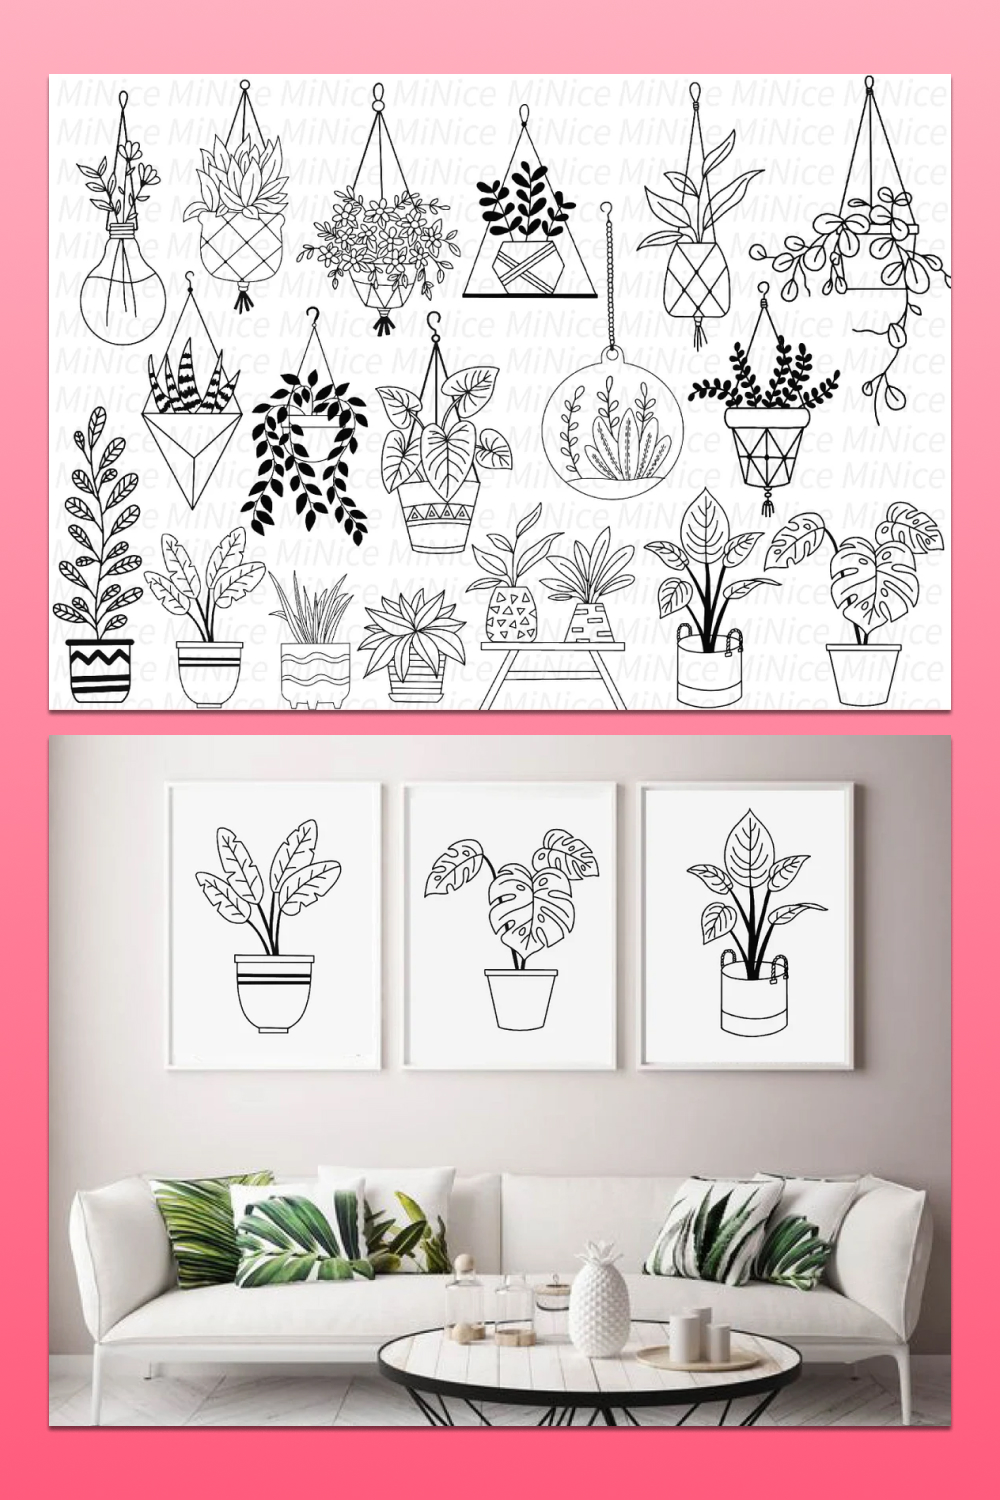 Submission of prints with drawings of plants in pots.